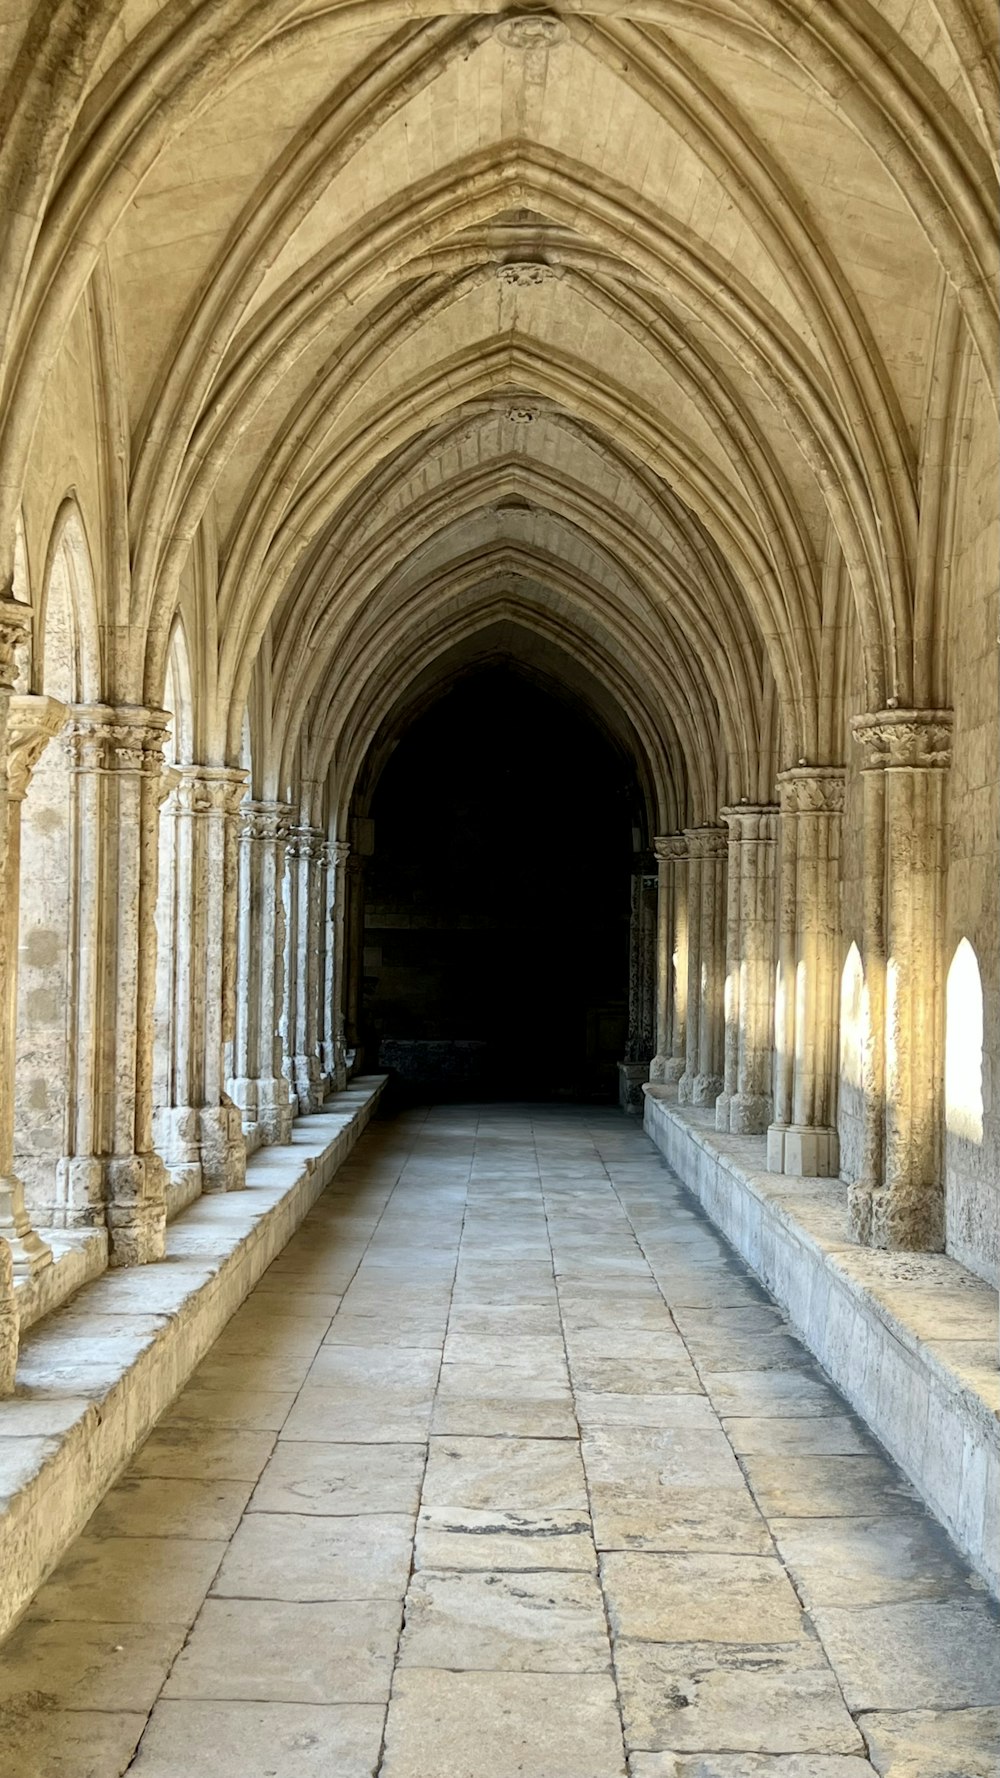 a stone walkway with arches